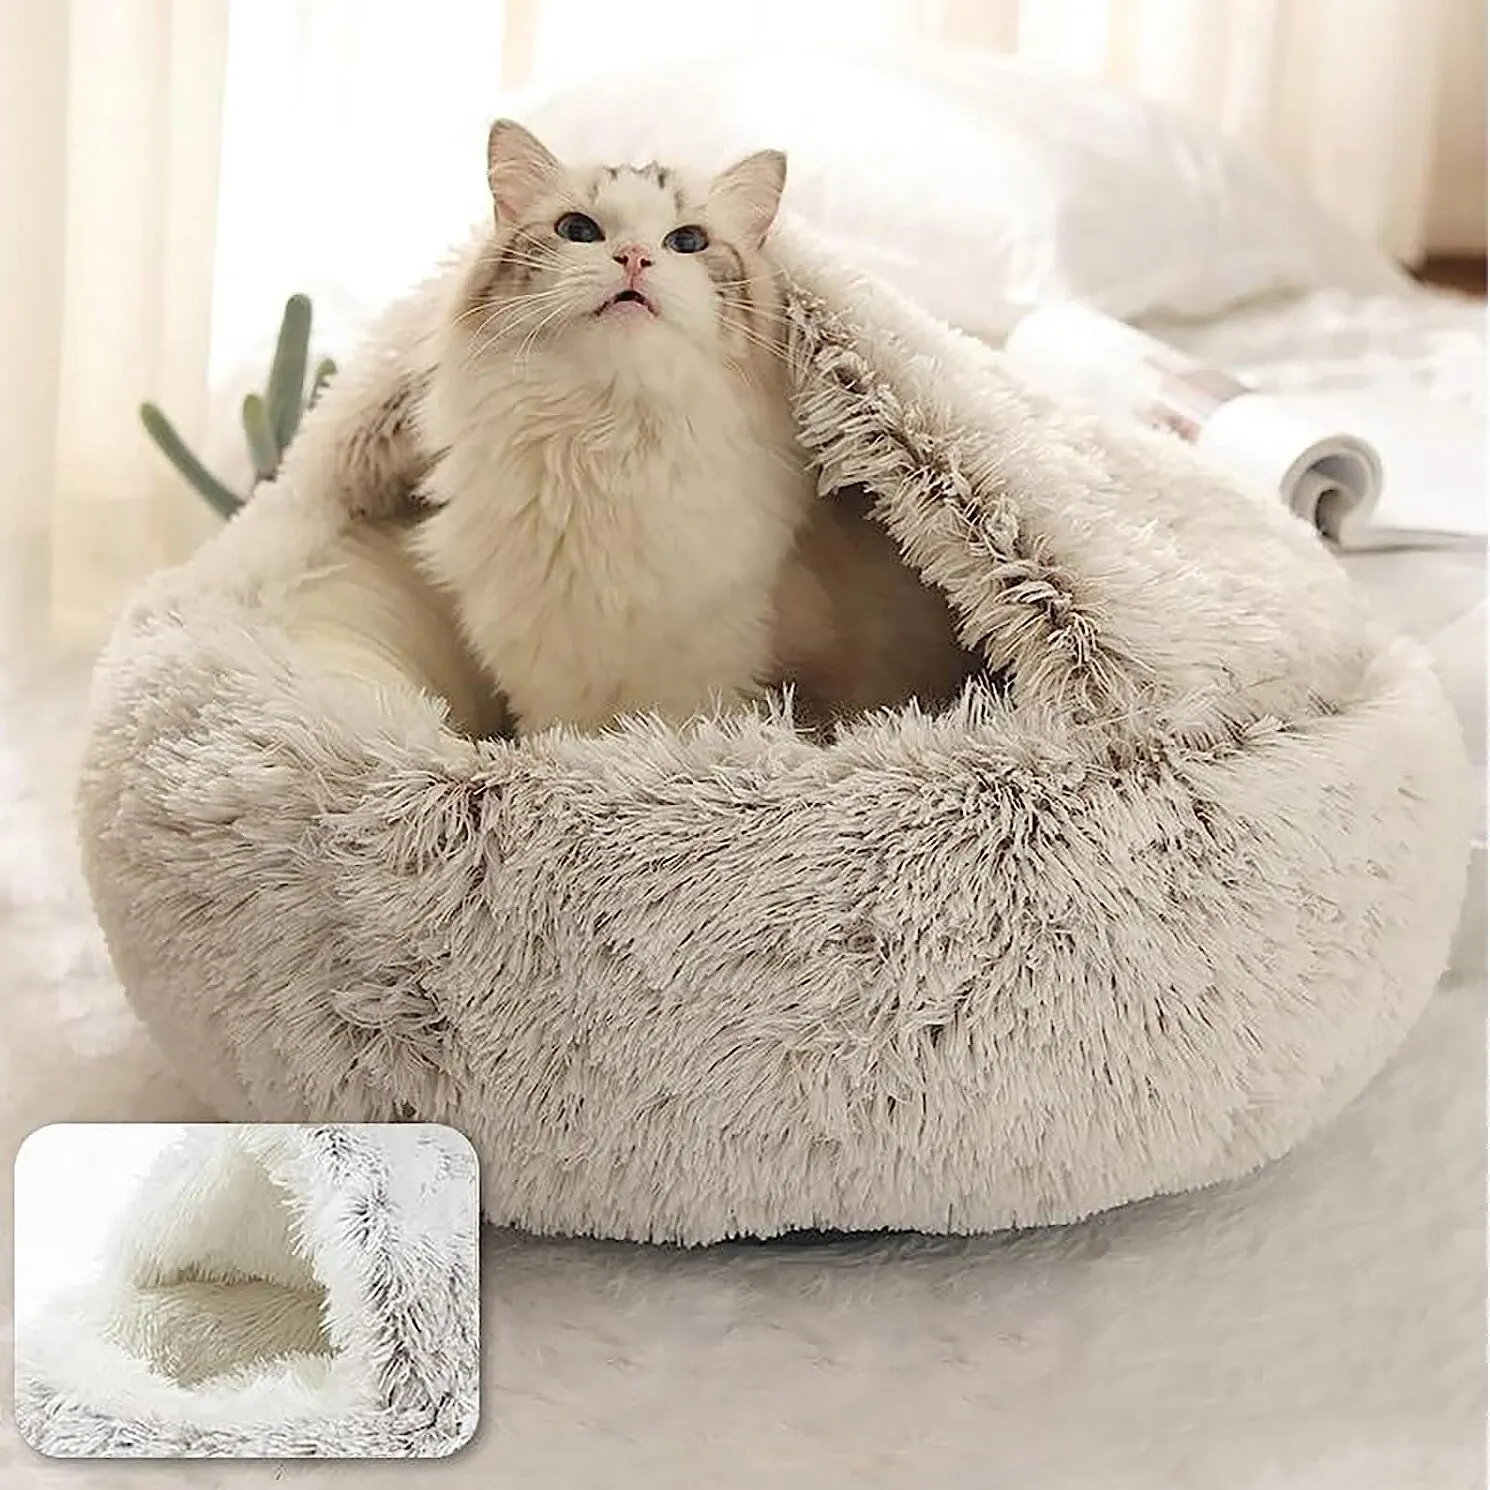 Adorable cat enjoying the luxurious embrace of a fluffy faux fur pet bed, with a close-up inset showing the bed's plush interior.